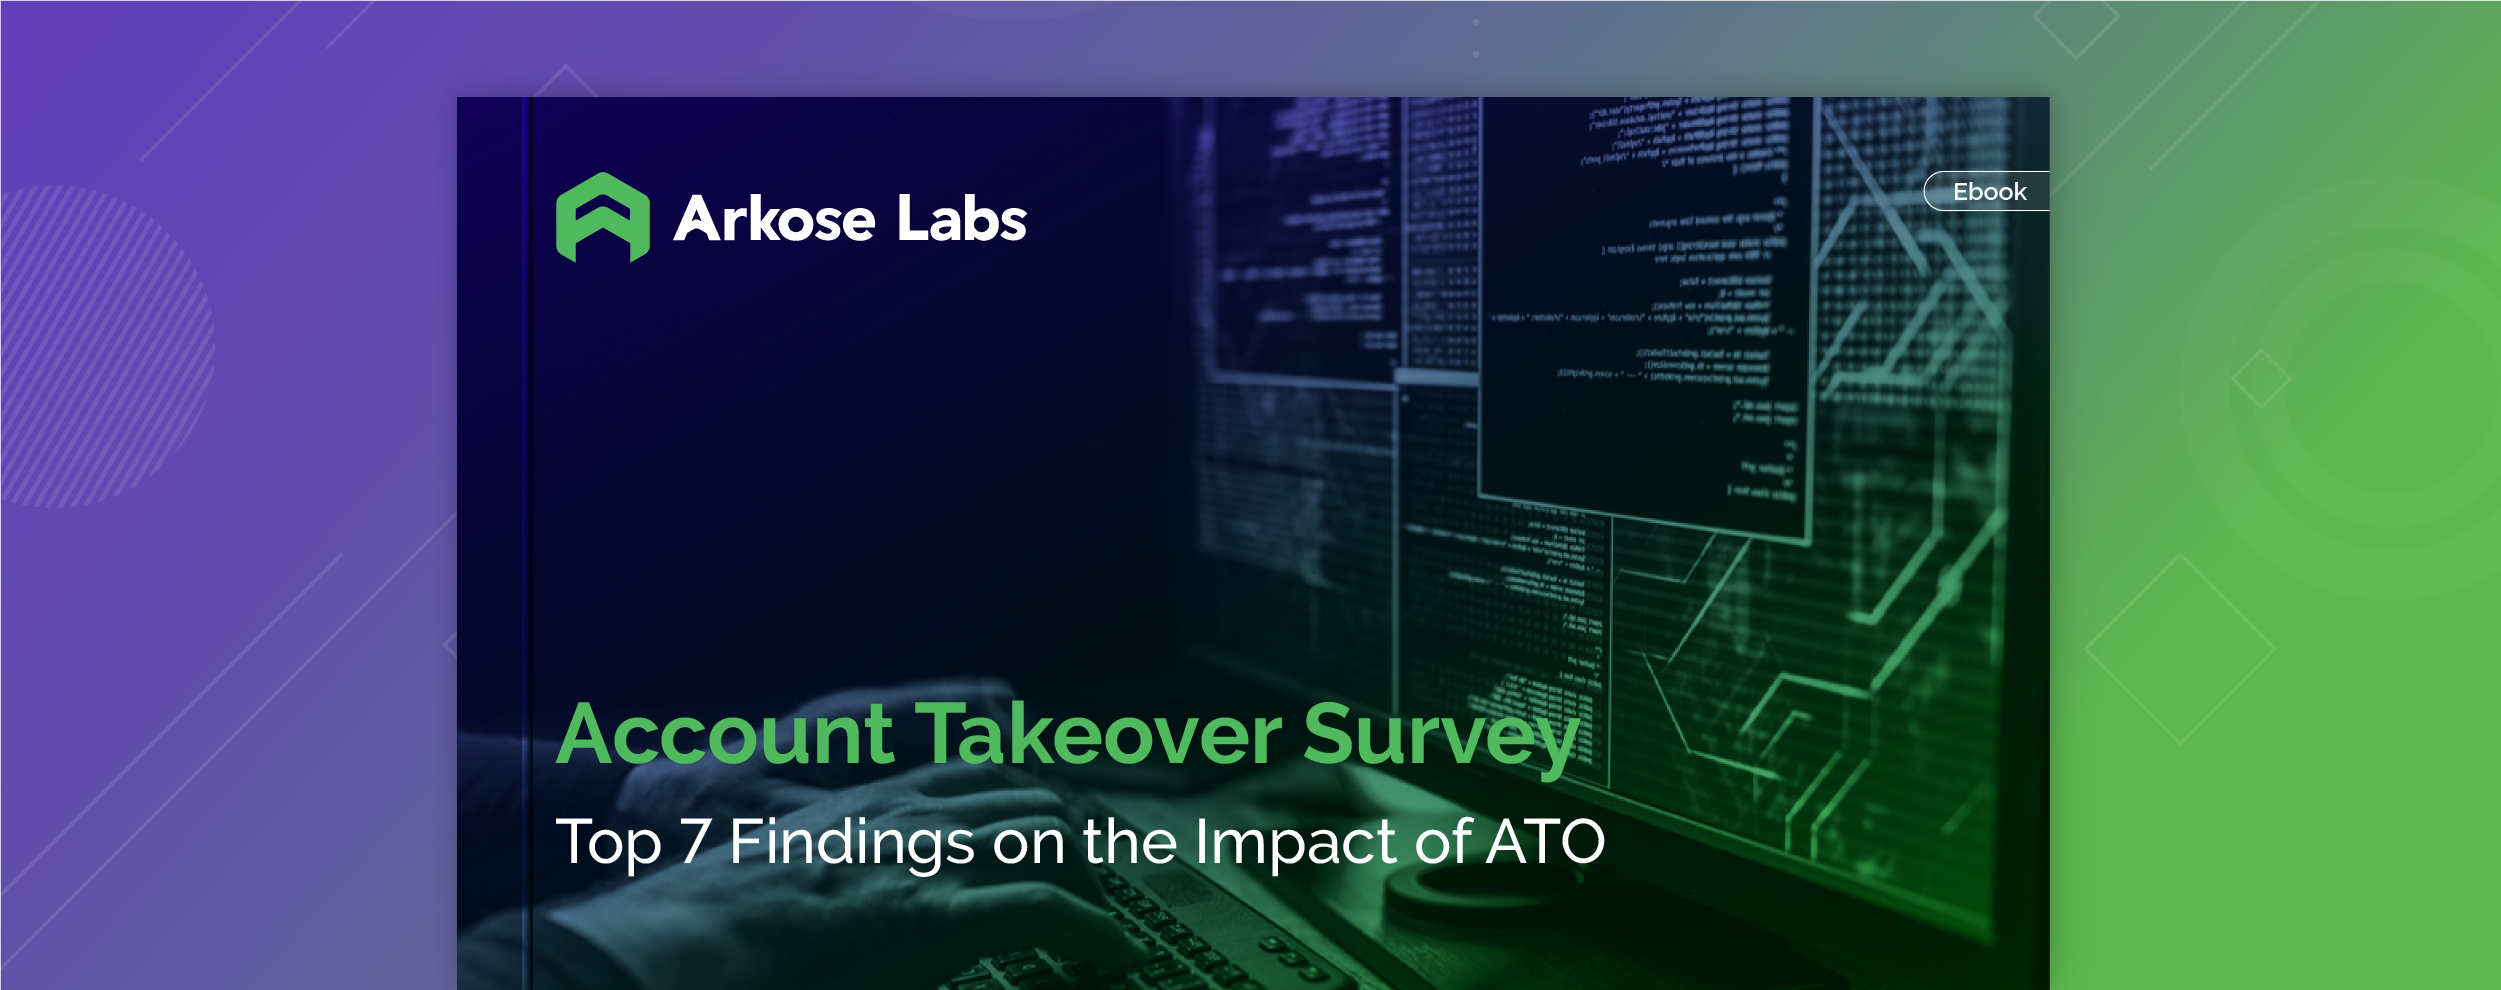 Account Takeover Survey: Top 7 Findings on the Impact of ATO